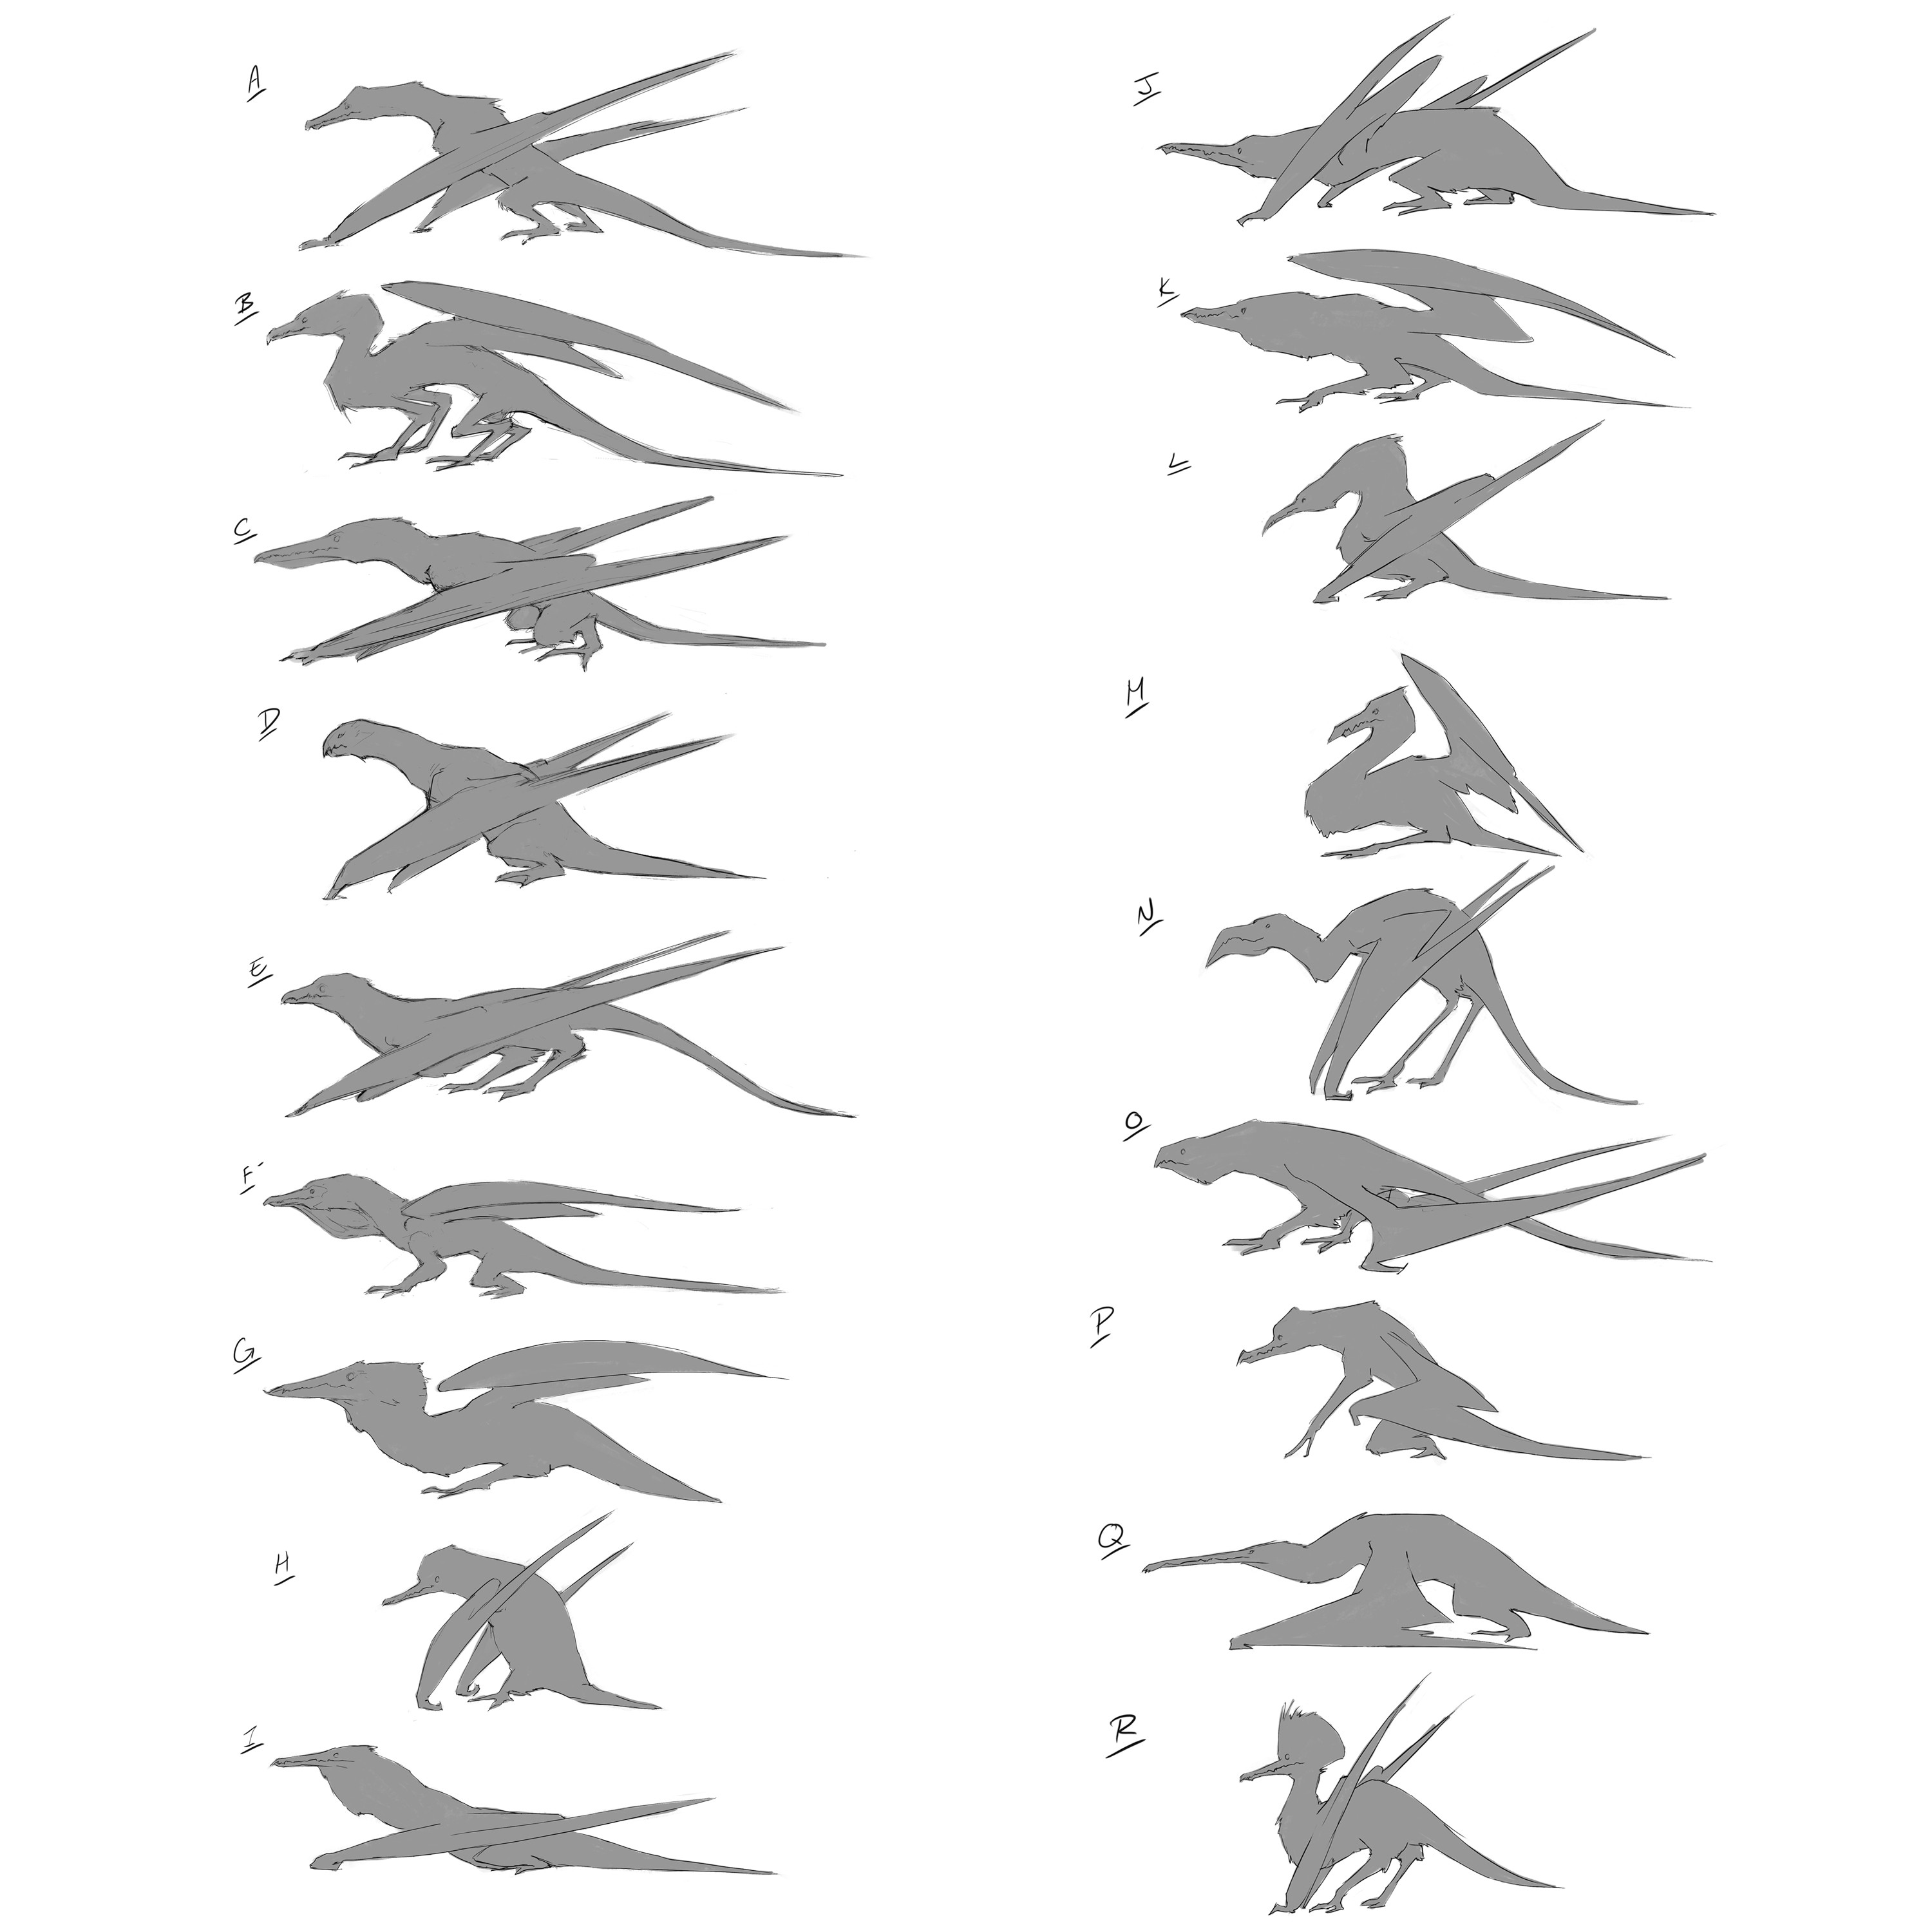 Early dragon silhouettes